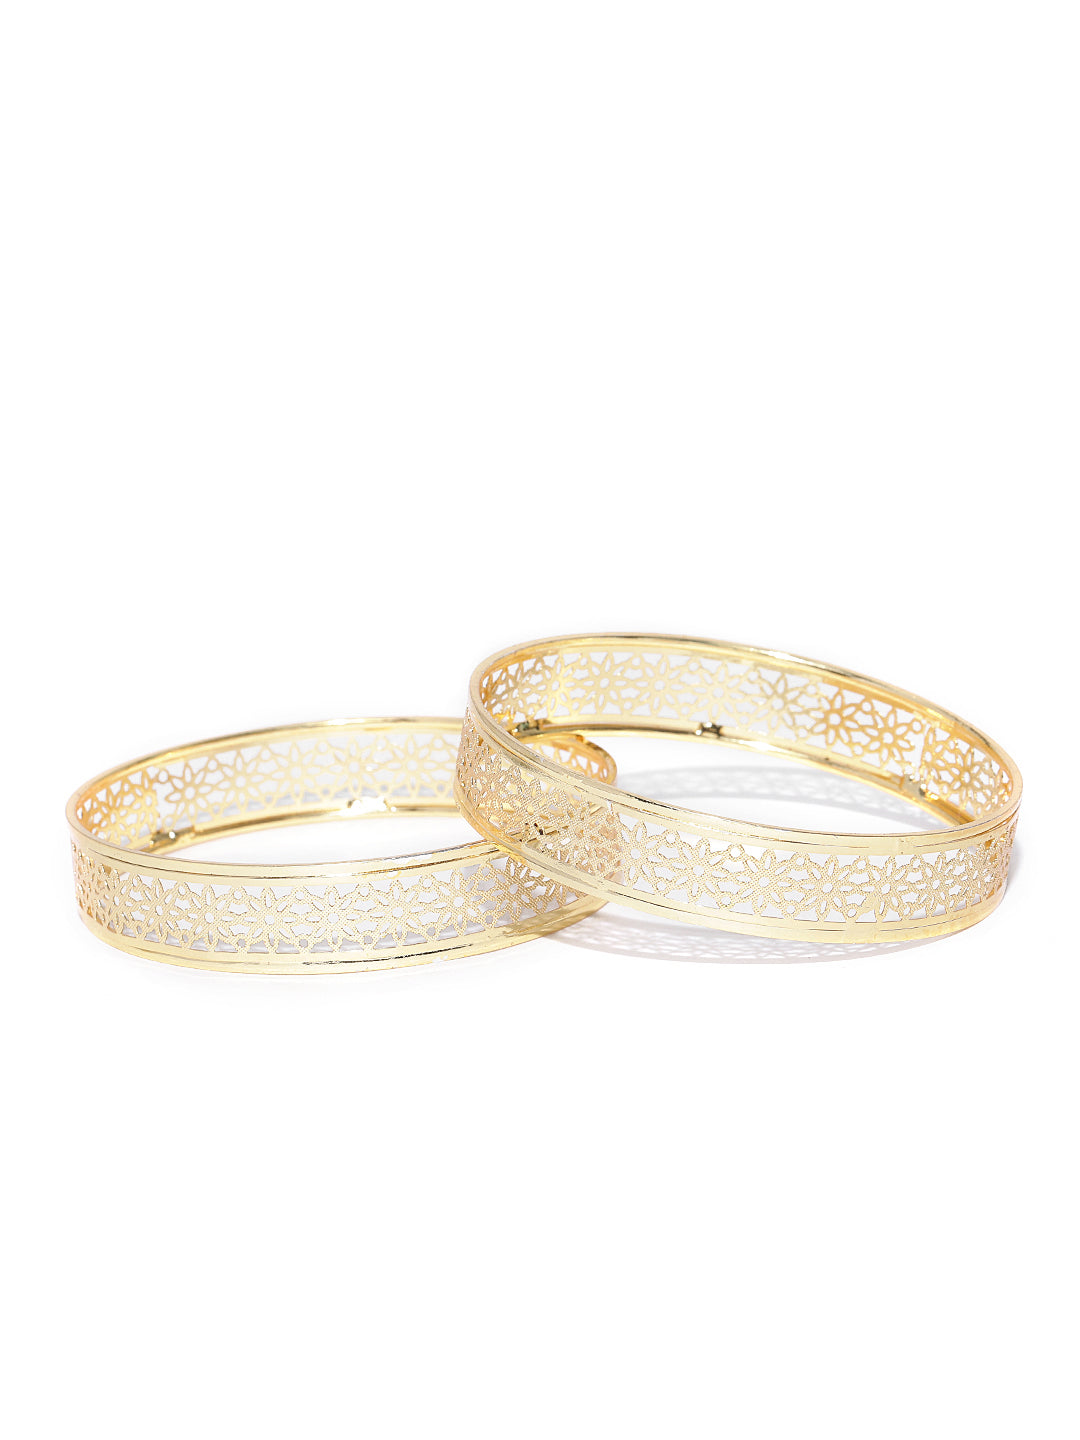 Set Of 2 Designer Gold Plated Engraved Stylish Bangles For Women And Girls